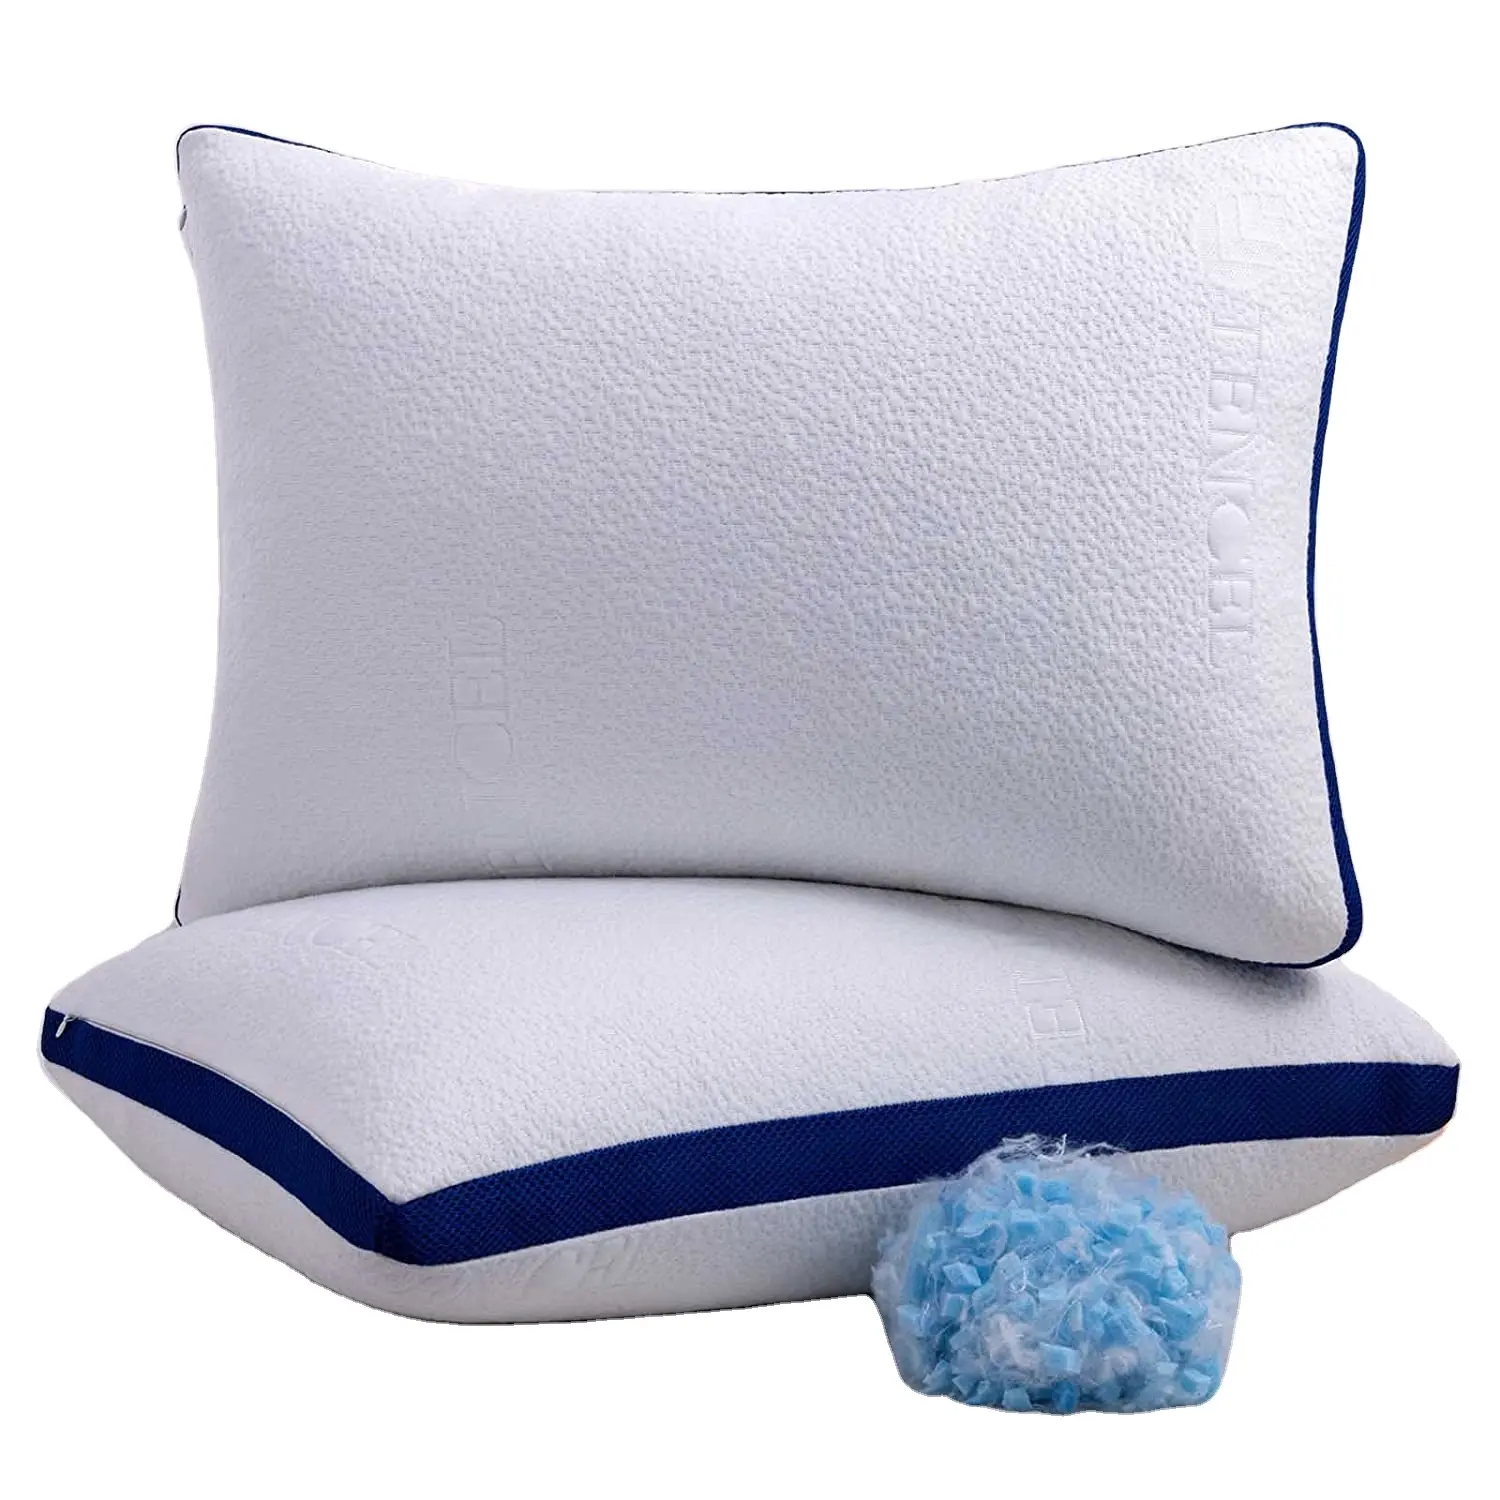 Cotton Cover Pack Of 2 Hypoallergenic Bed Pillows For Neck Pain Shredded Memory Foam Pillow Sleeping Pillows